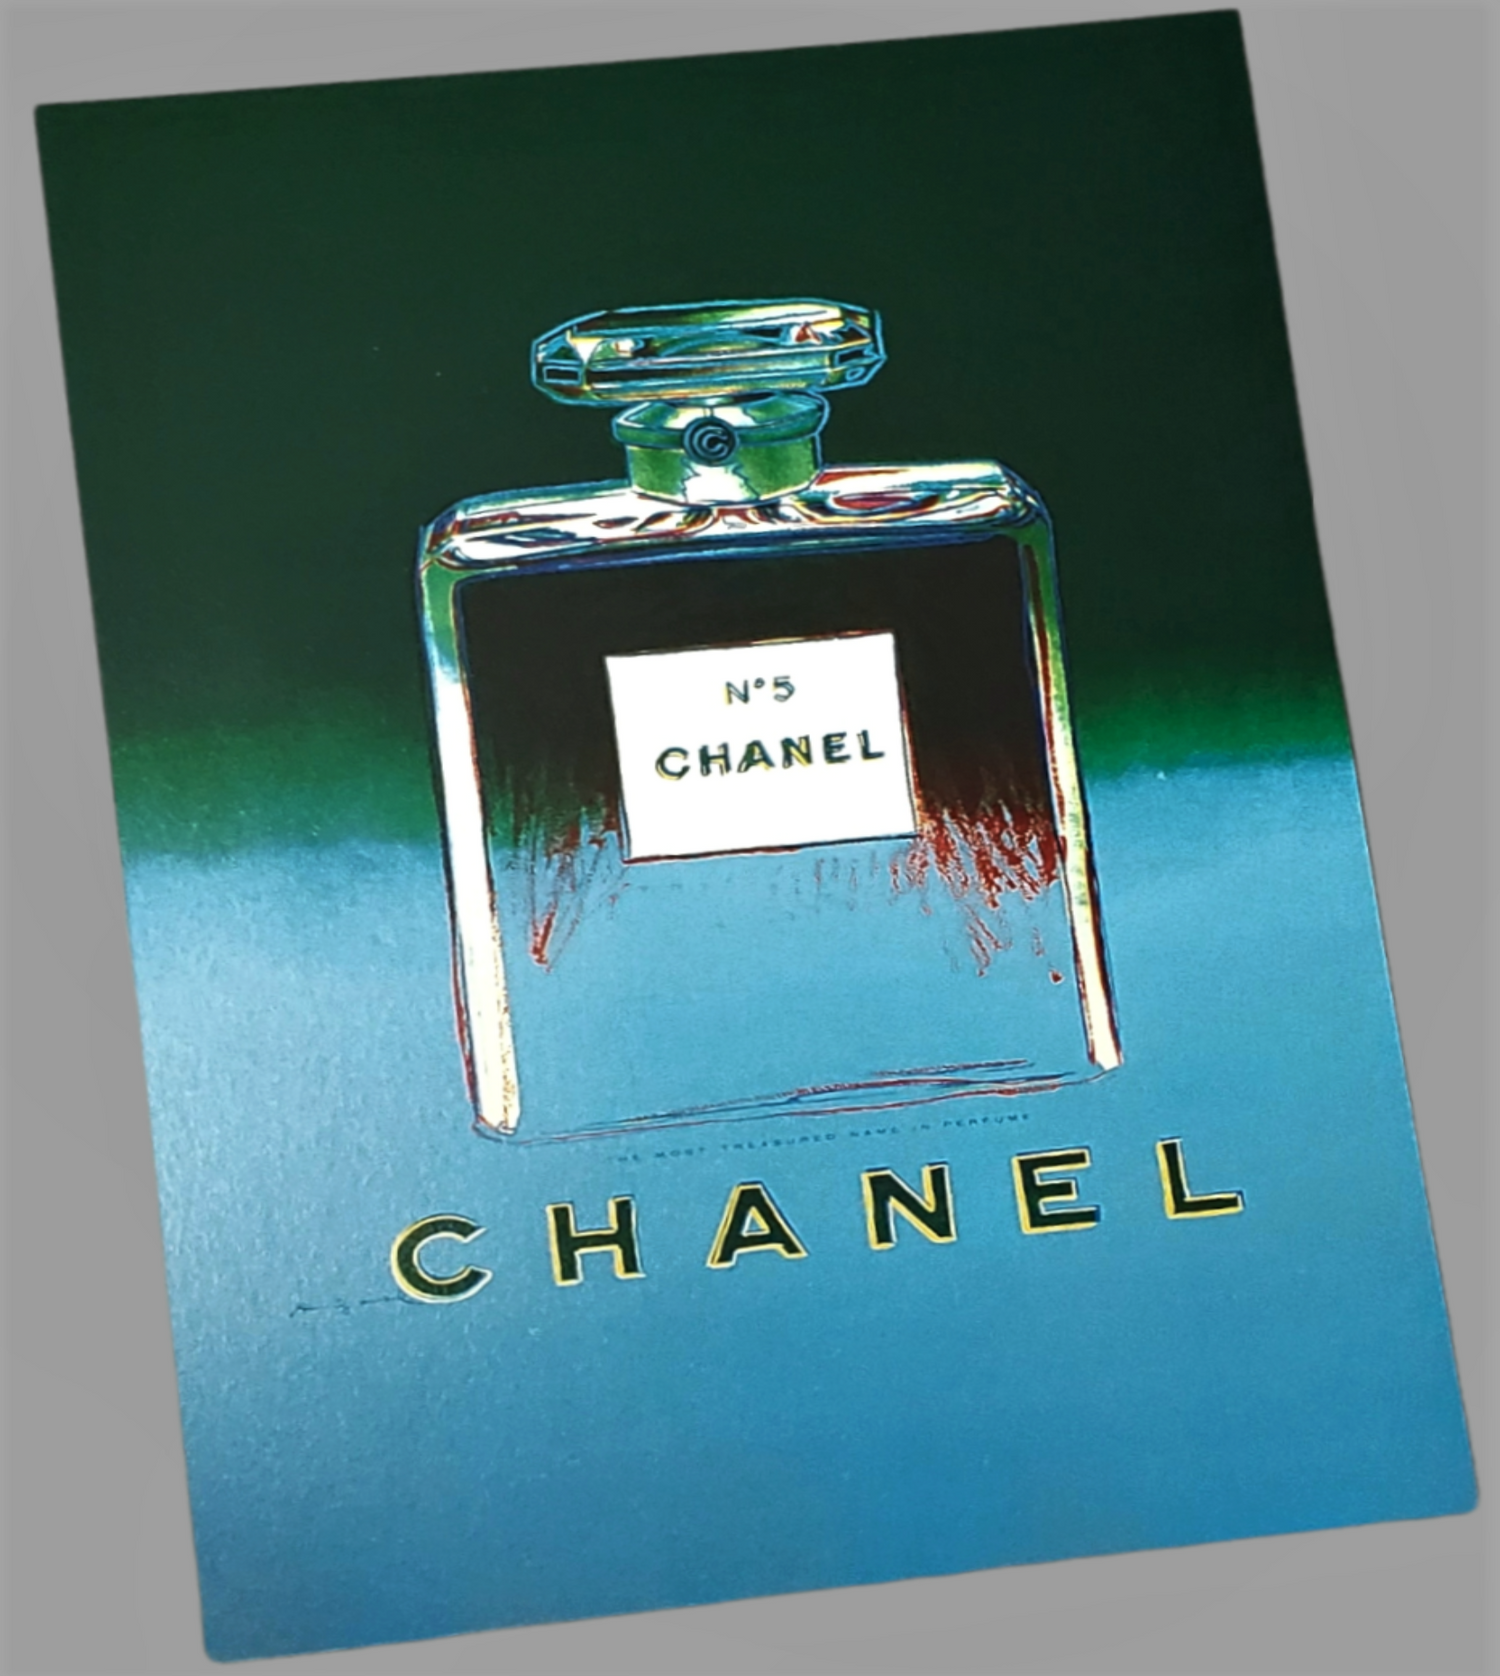 Chanel No.5 Teal Andy Warhol Home Décor Art – AREA51GALLERY